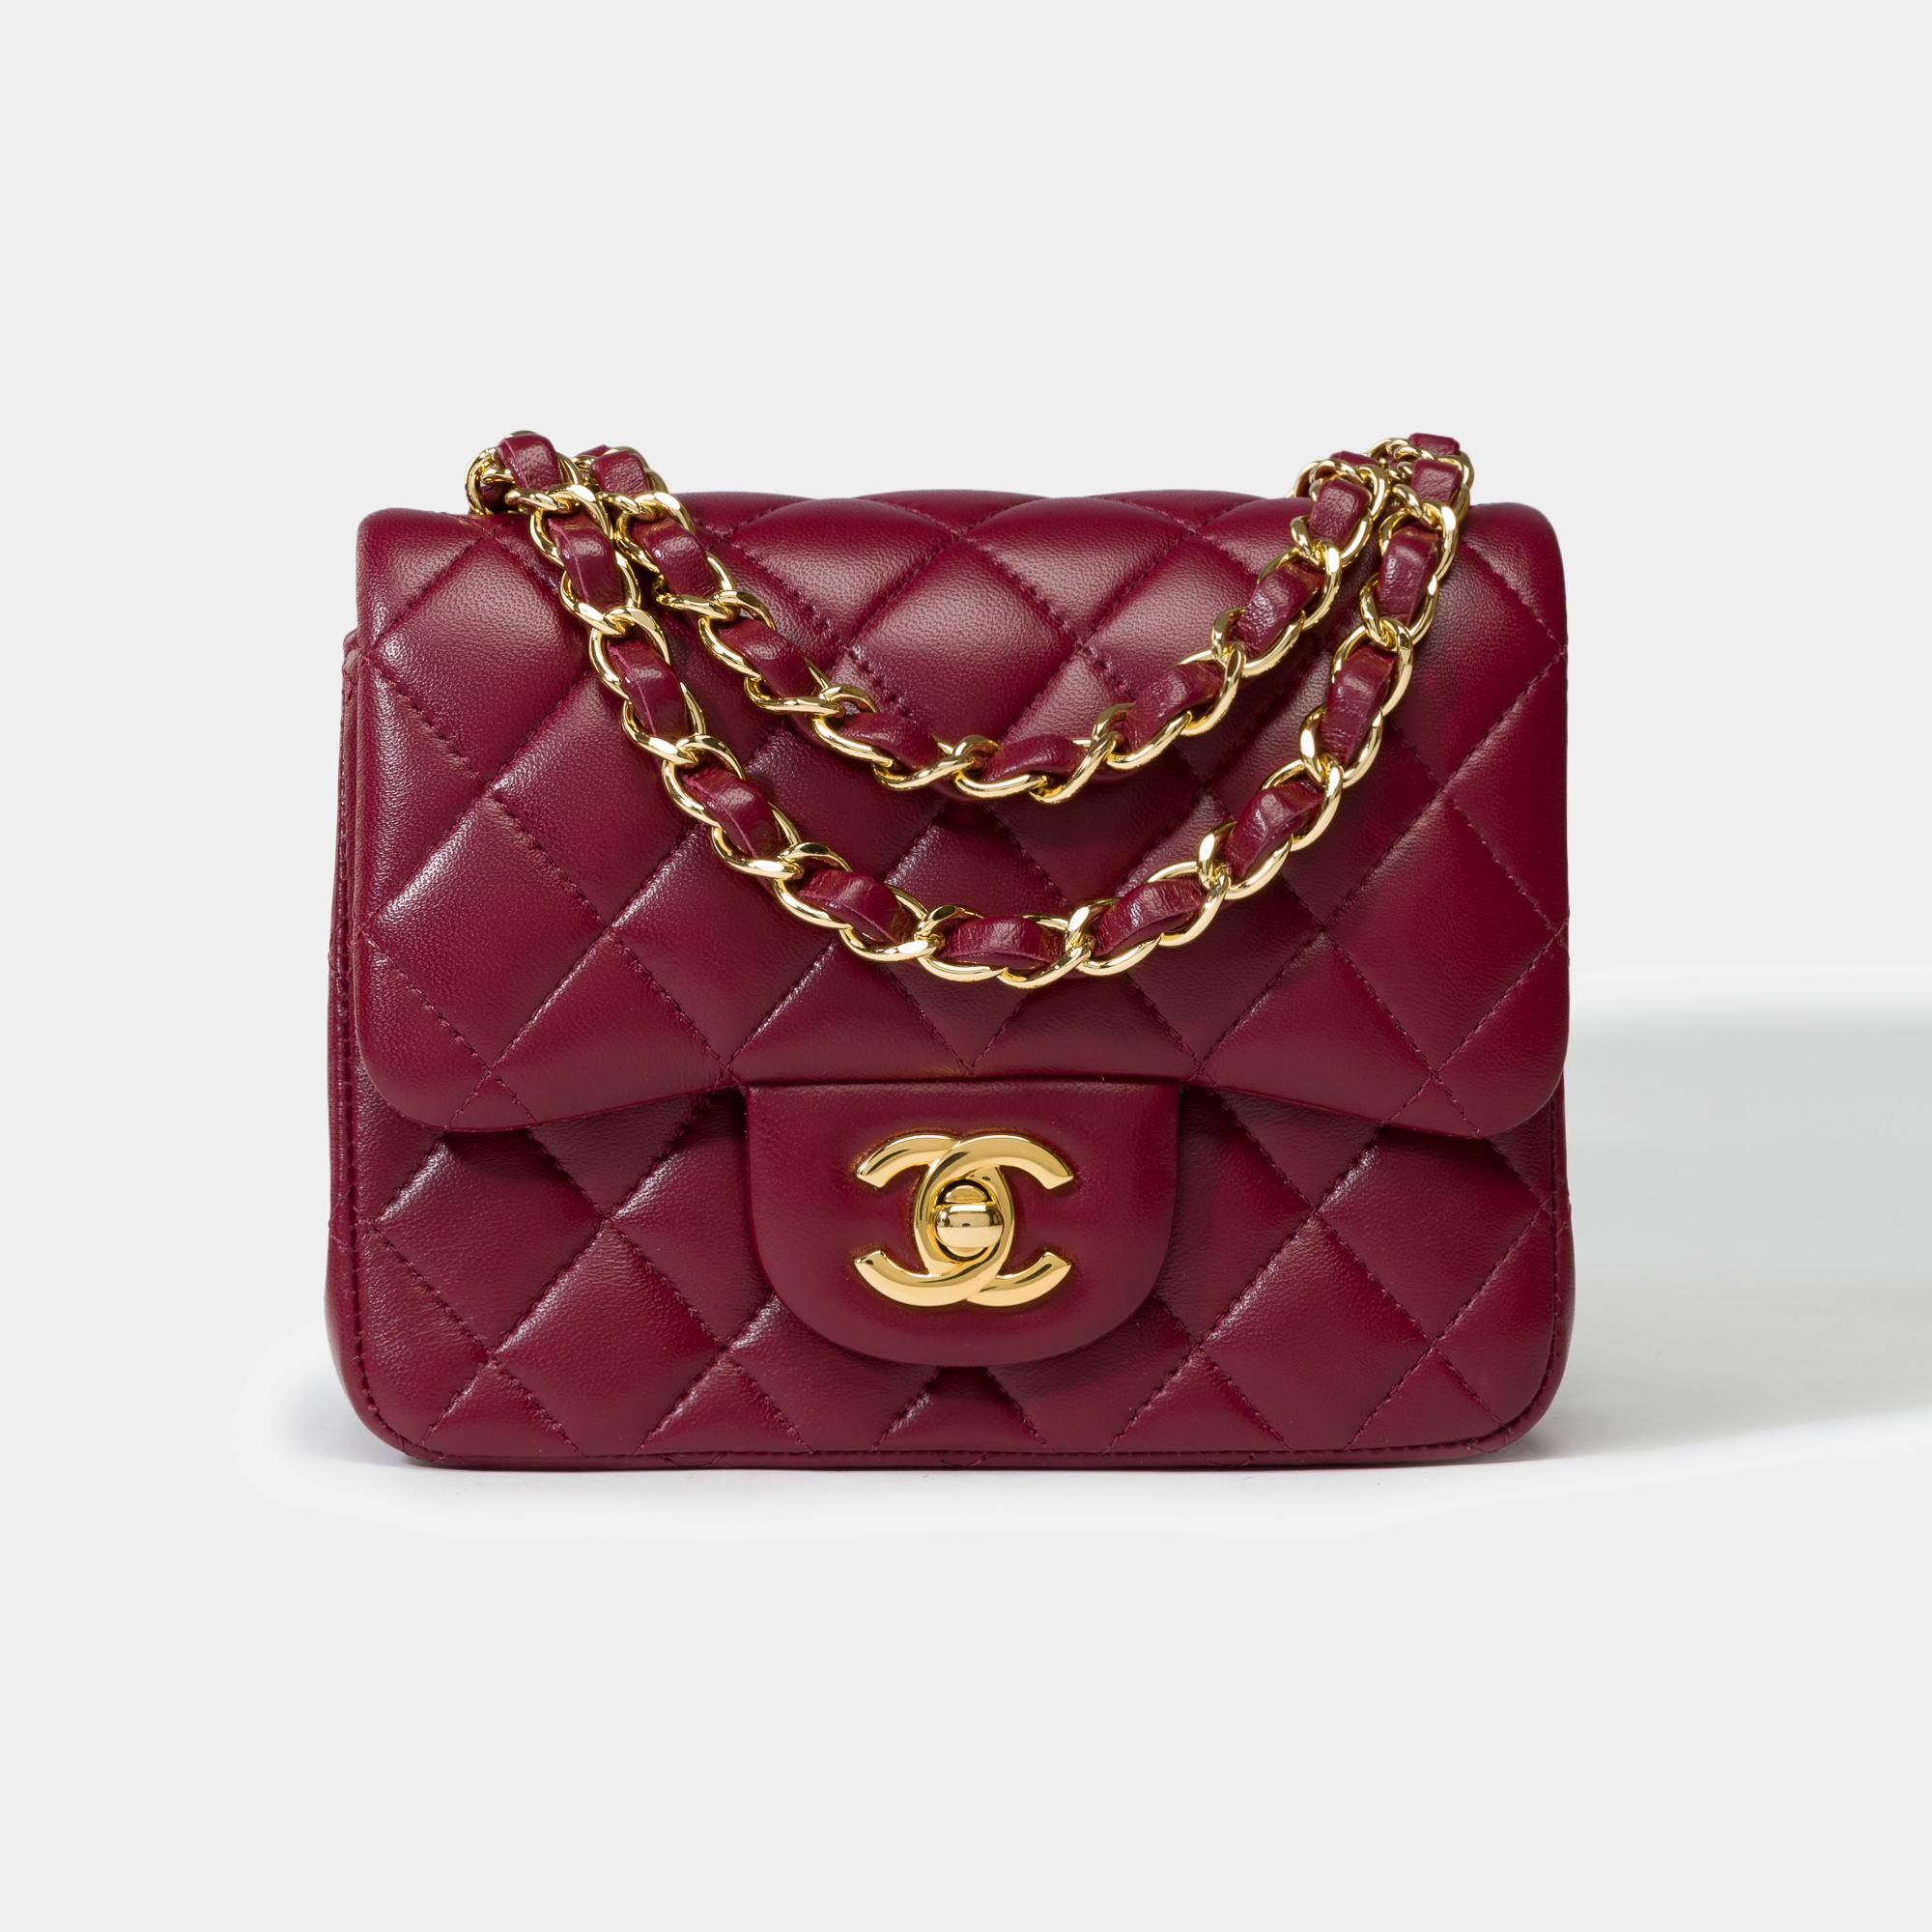 Stunning​ ​&​ ​Rare​ ​Chanel​ ​Mini​ ​Timeless​ ​shoulder​ ​flap​ ​bag​ ​in​ ​plum​ ​quilted​ ​lambskin leather ,​ ​gold​ ​metal​ ​chain​ ​handle​ ​interlaced​ ​with​ ​plum​ ​leather​ ​allowing​ ​a​ ​hand​ ​or​ ​shoulder​ ​or​ ​crossbody​